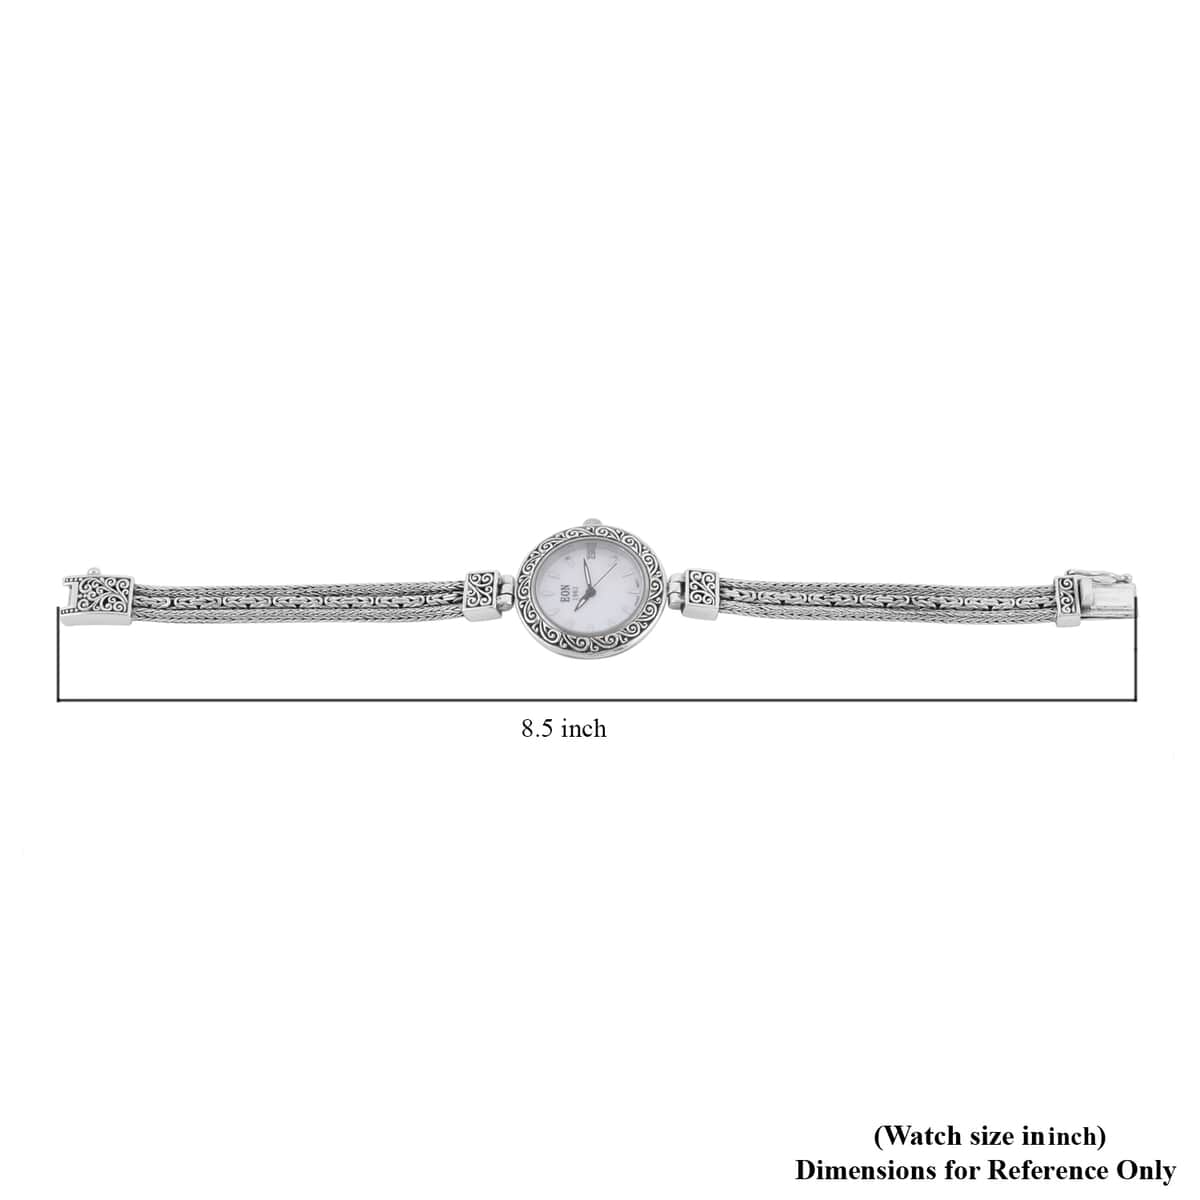 BALI LEGACY EON 1962 Swiss Movement Water Resistant Bracelet Watch in Sterling Silver (7 in) (34 g) image number 6